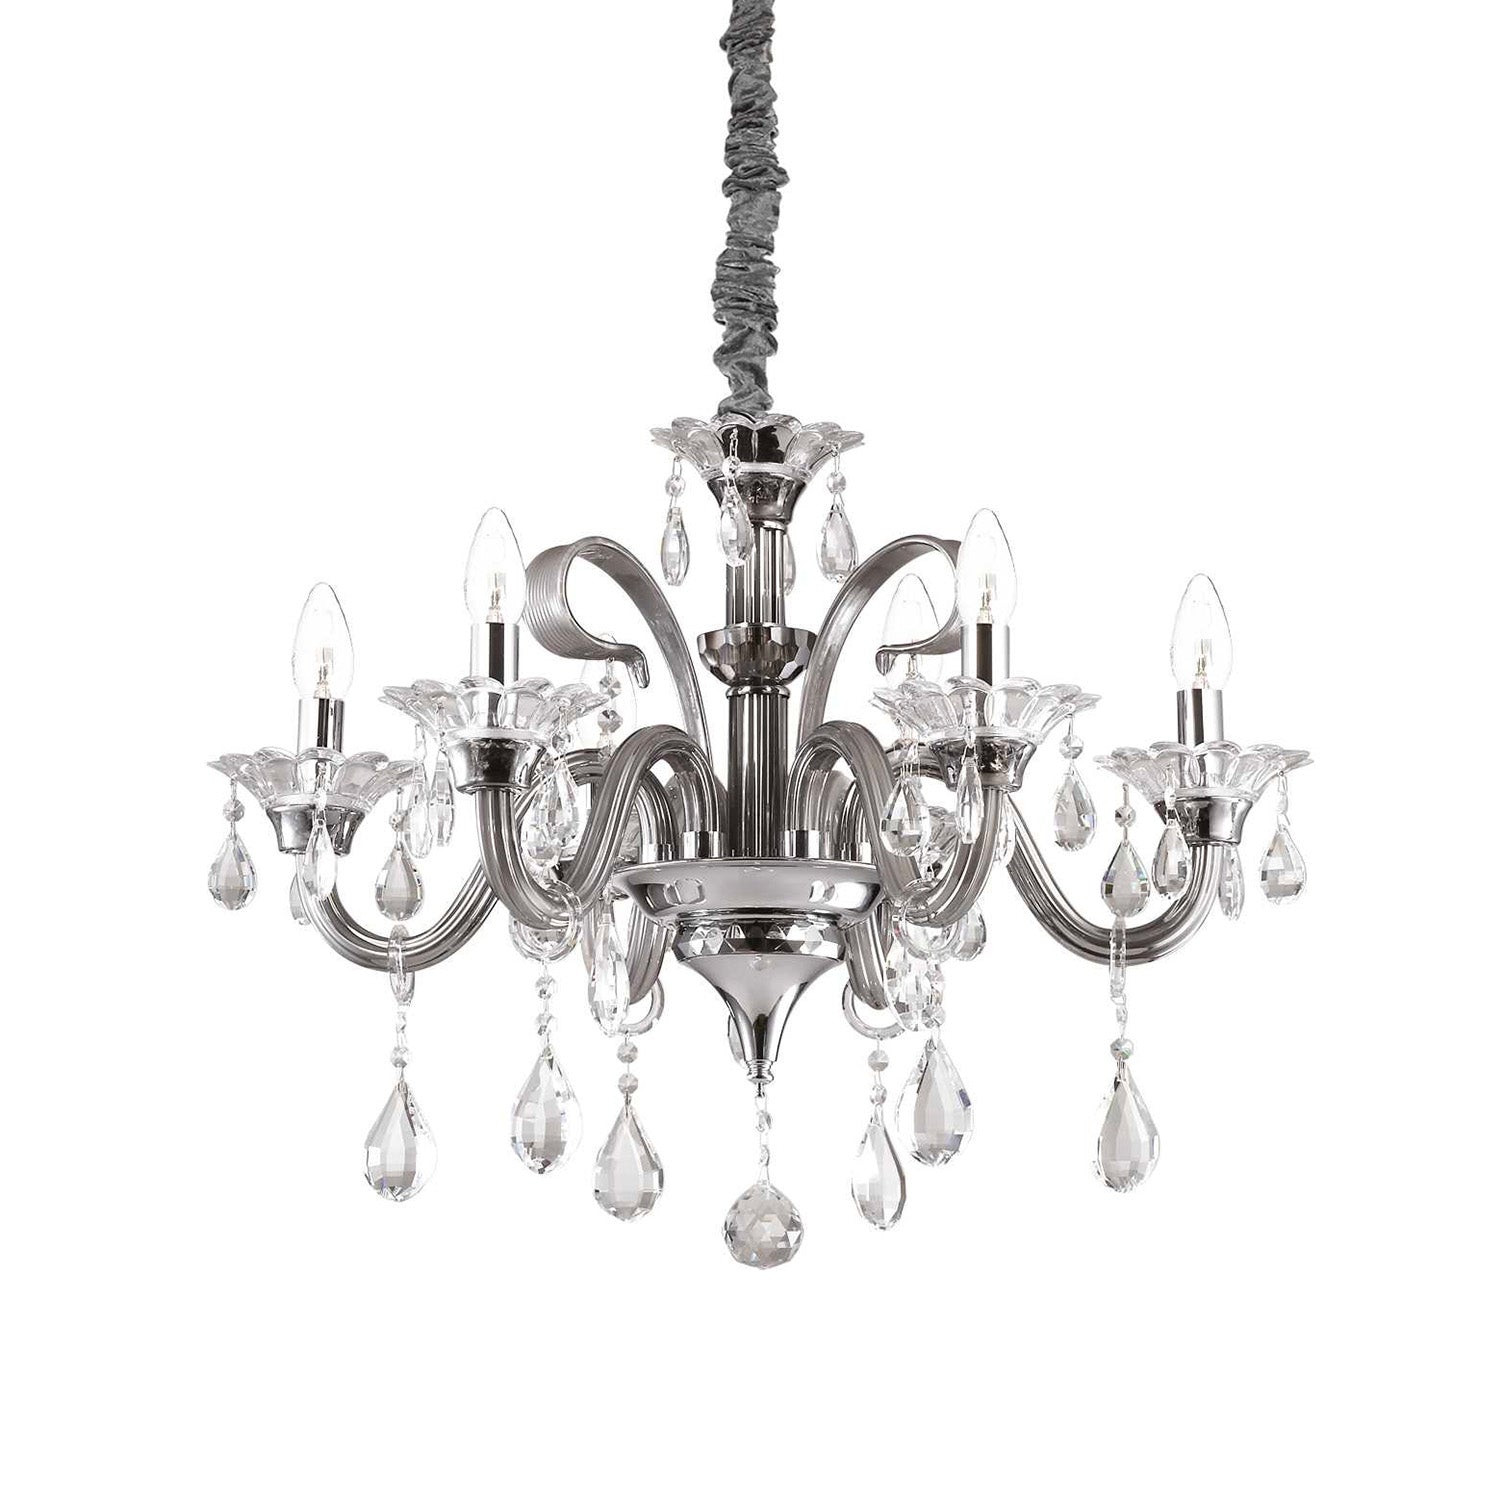 COLOSSAL - Chandelier chandelier with smoked glass and crystal pendants